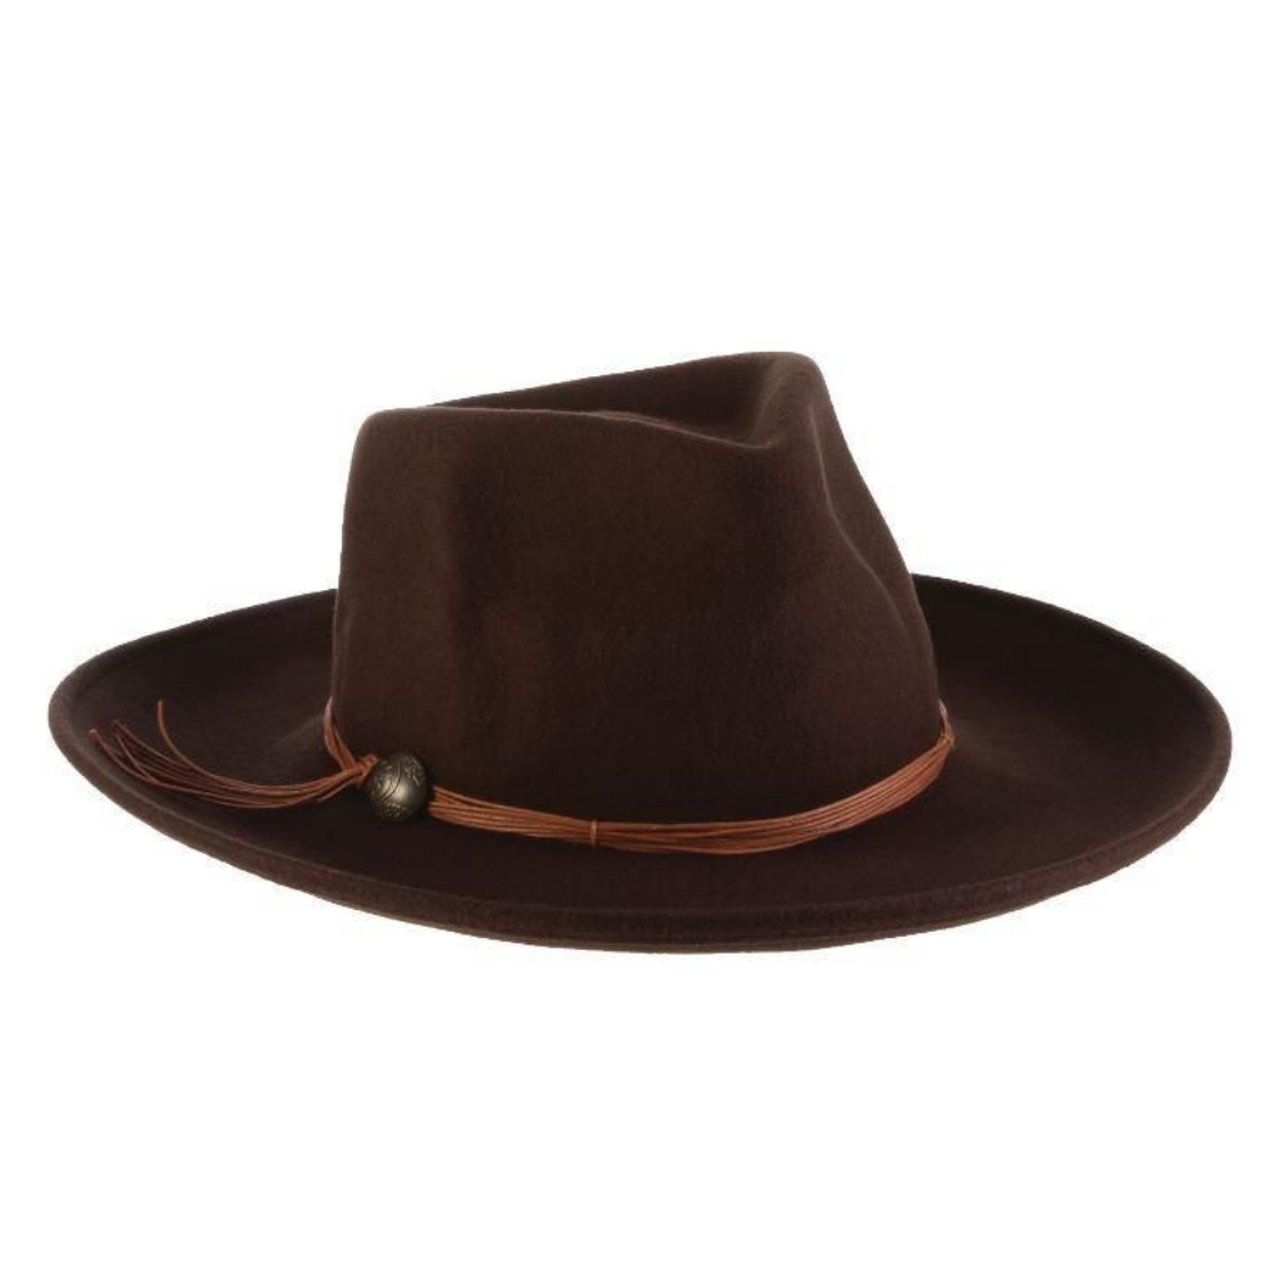 Hat (LF246) - Palermo Wool Felt Rancher One Size Fits Most